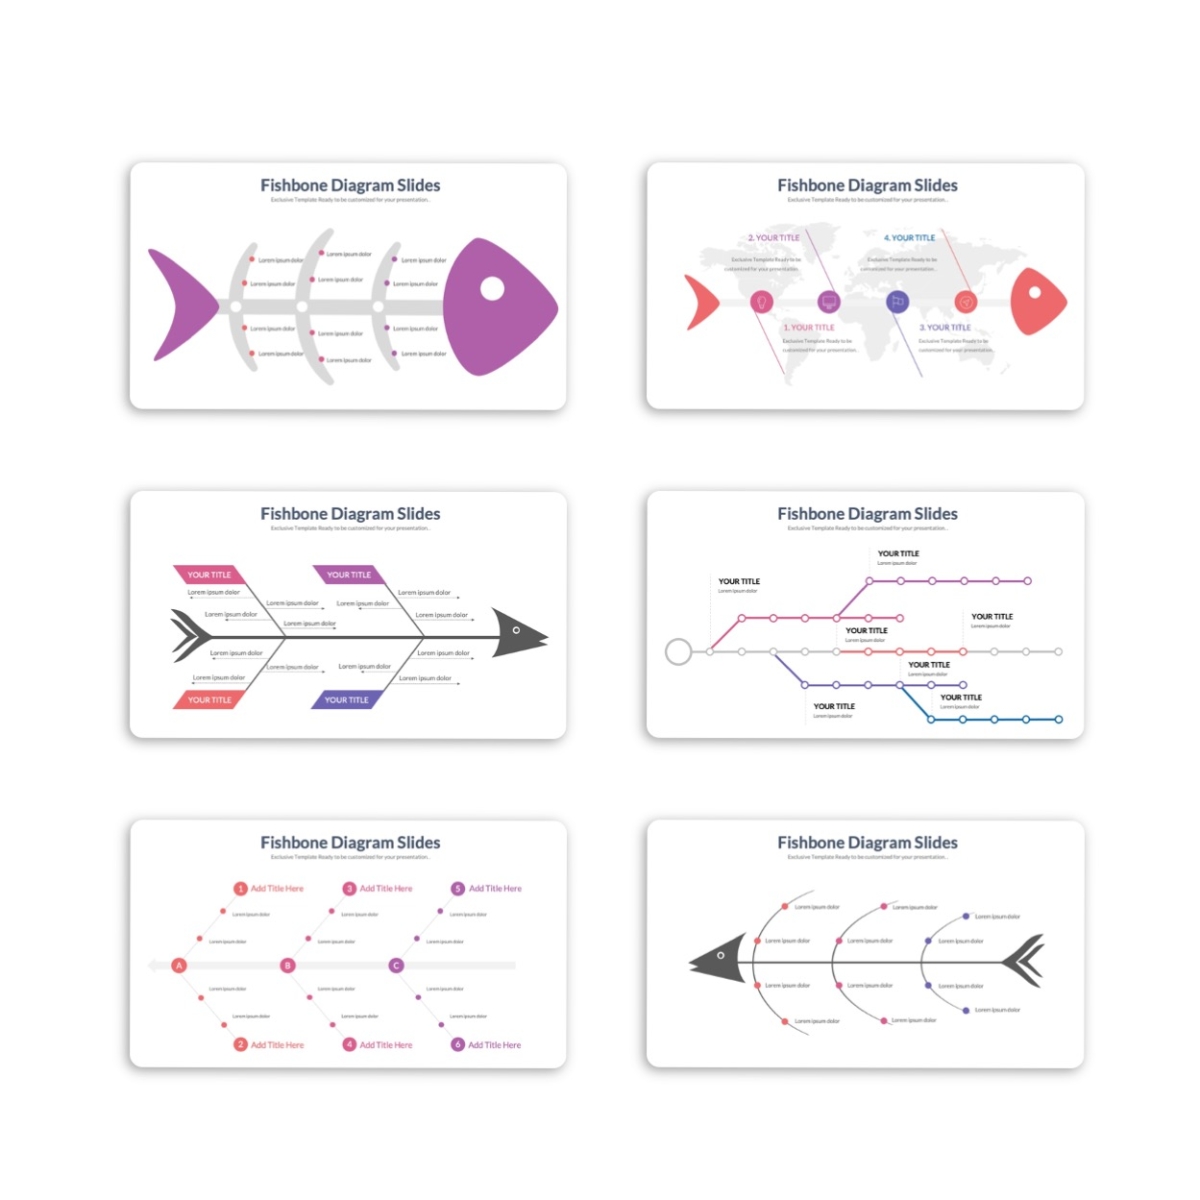 Fishbone Diagram Infographic PowerPoint Template